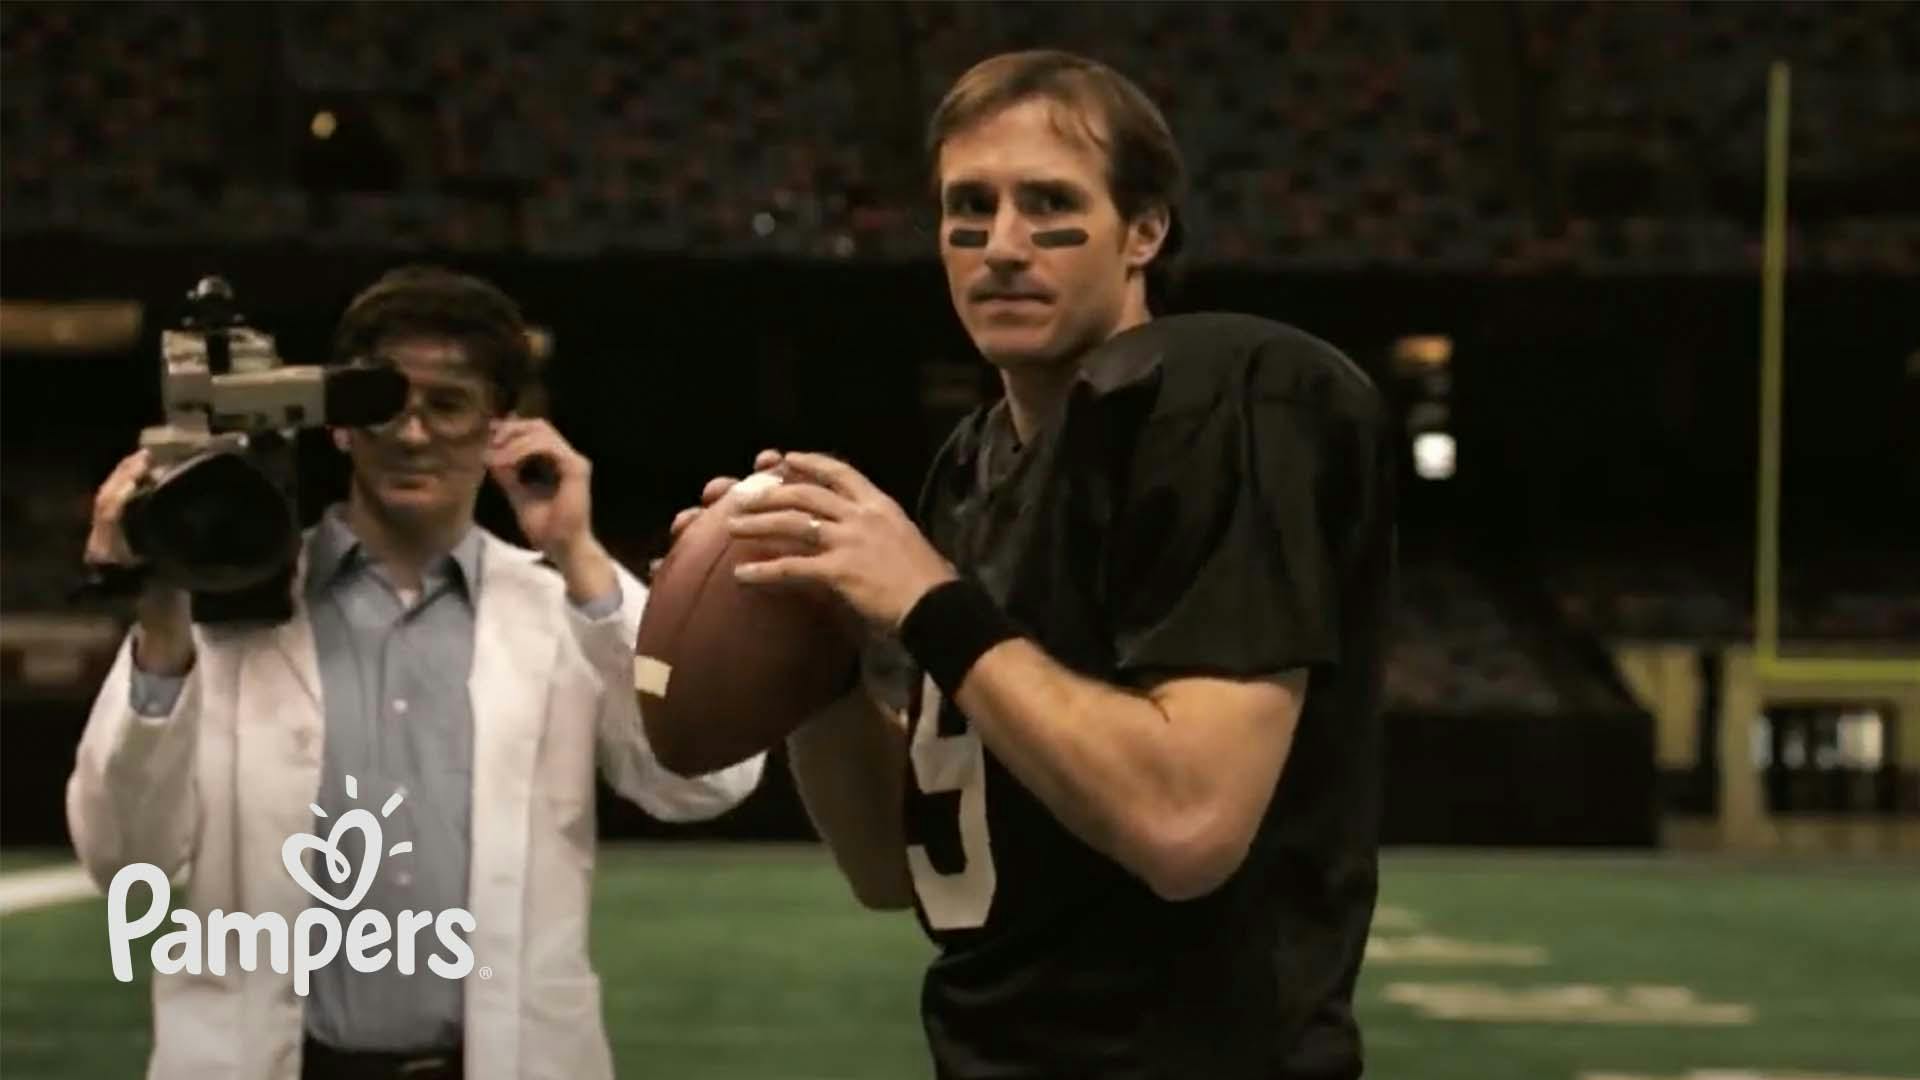 Quarterback Drew Brees holds the football while a man in a white lab coat with a video camera stands next to him.